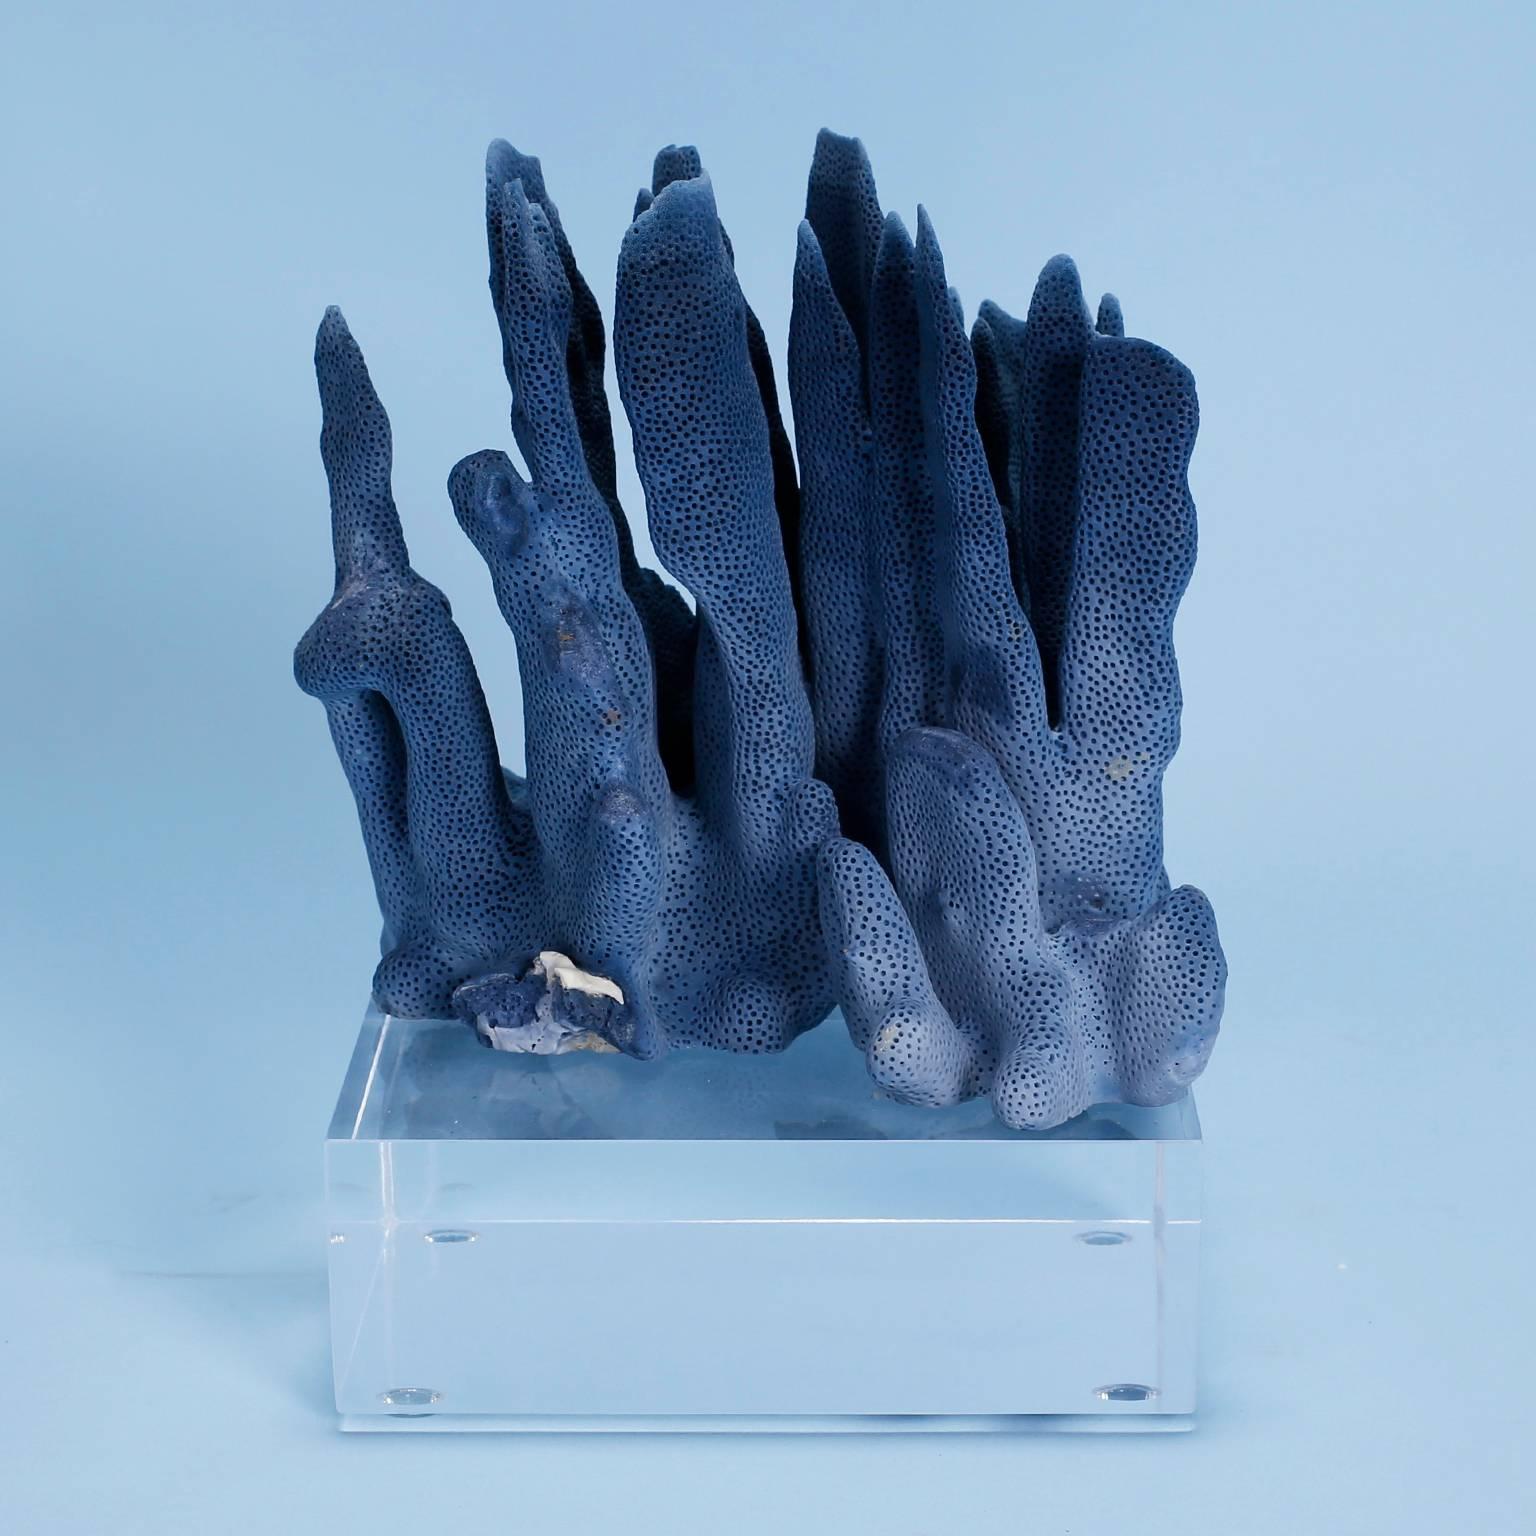 Two rare dark blue coral specimens with luxurious indigo hues, sea inspired textures, and unique sculptural forms. Presented on thick custom Lucite stands. Priced individually.

From left to right:

BL01 H 9, W 7, D 6 
BL02 H 8.5, W 8.5, D